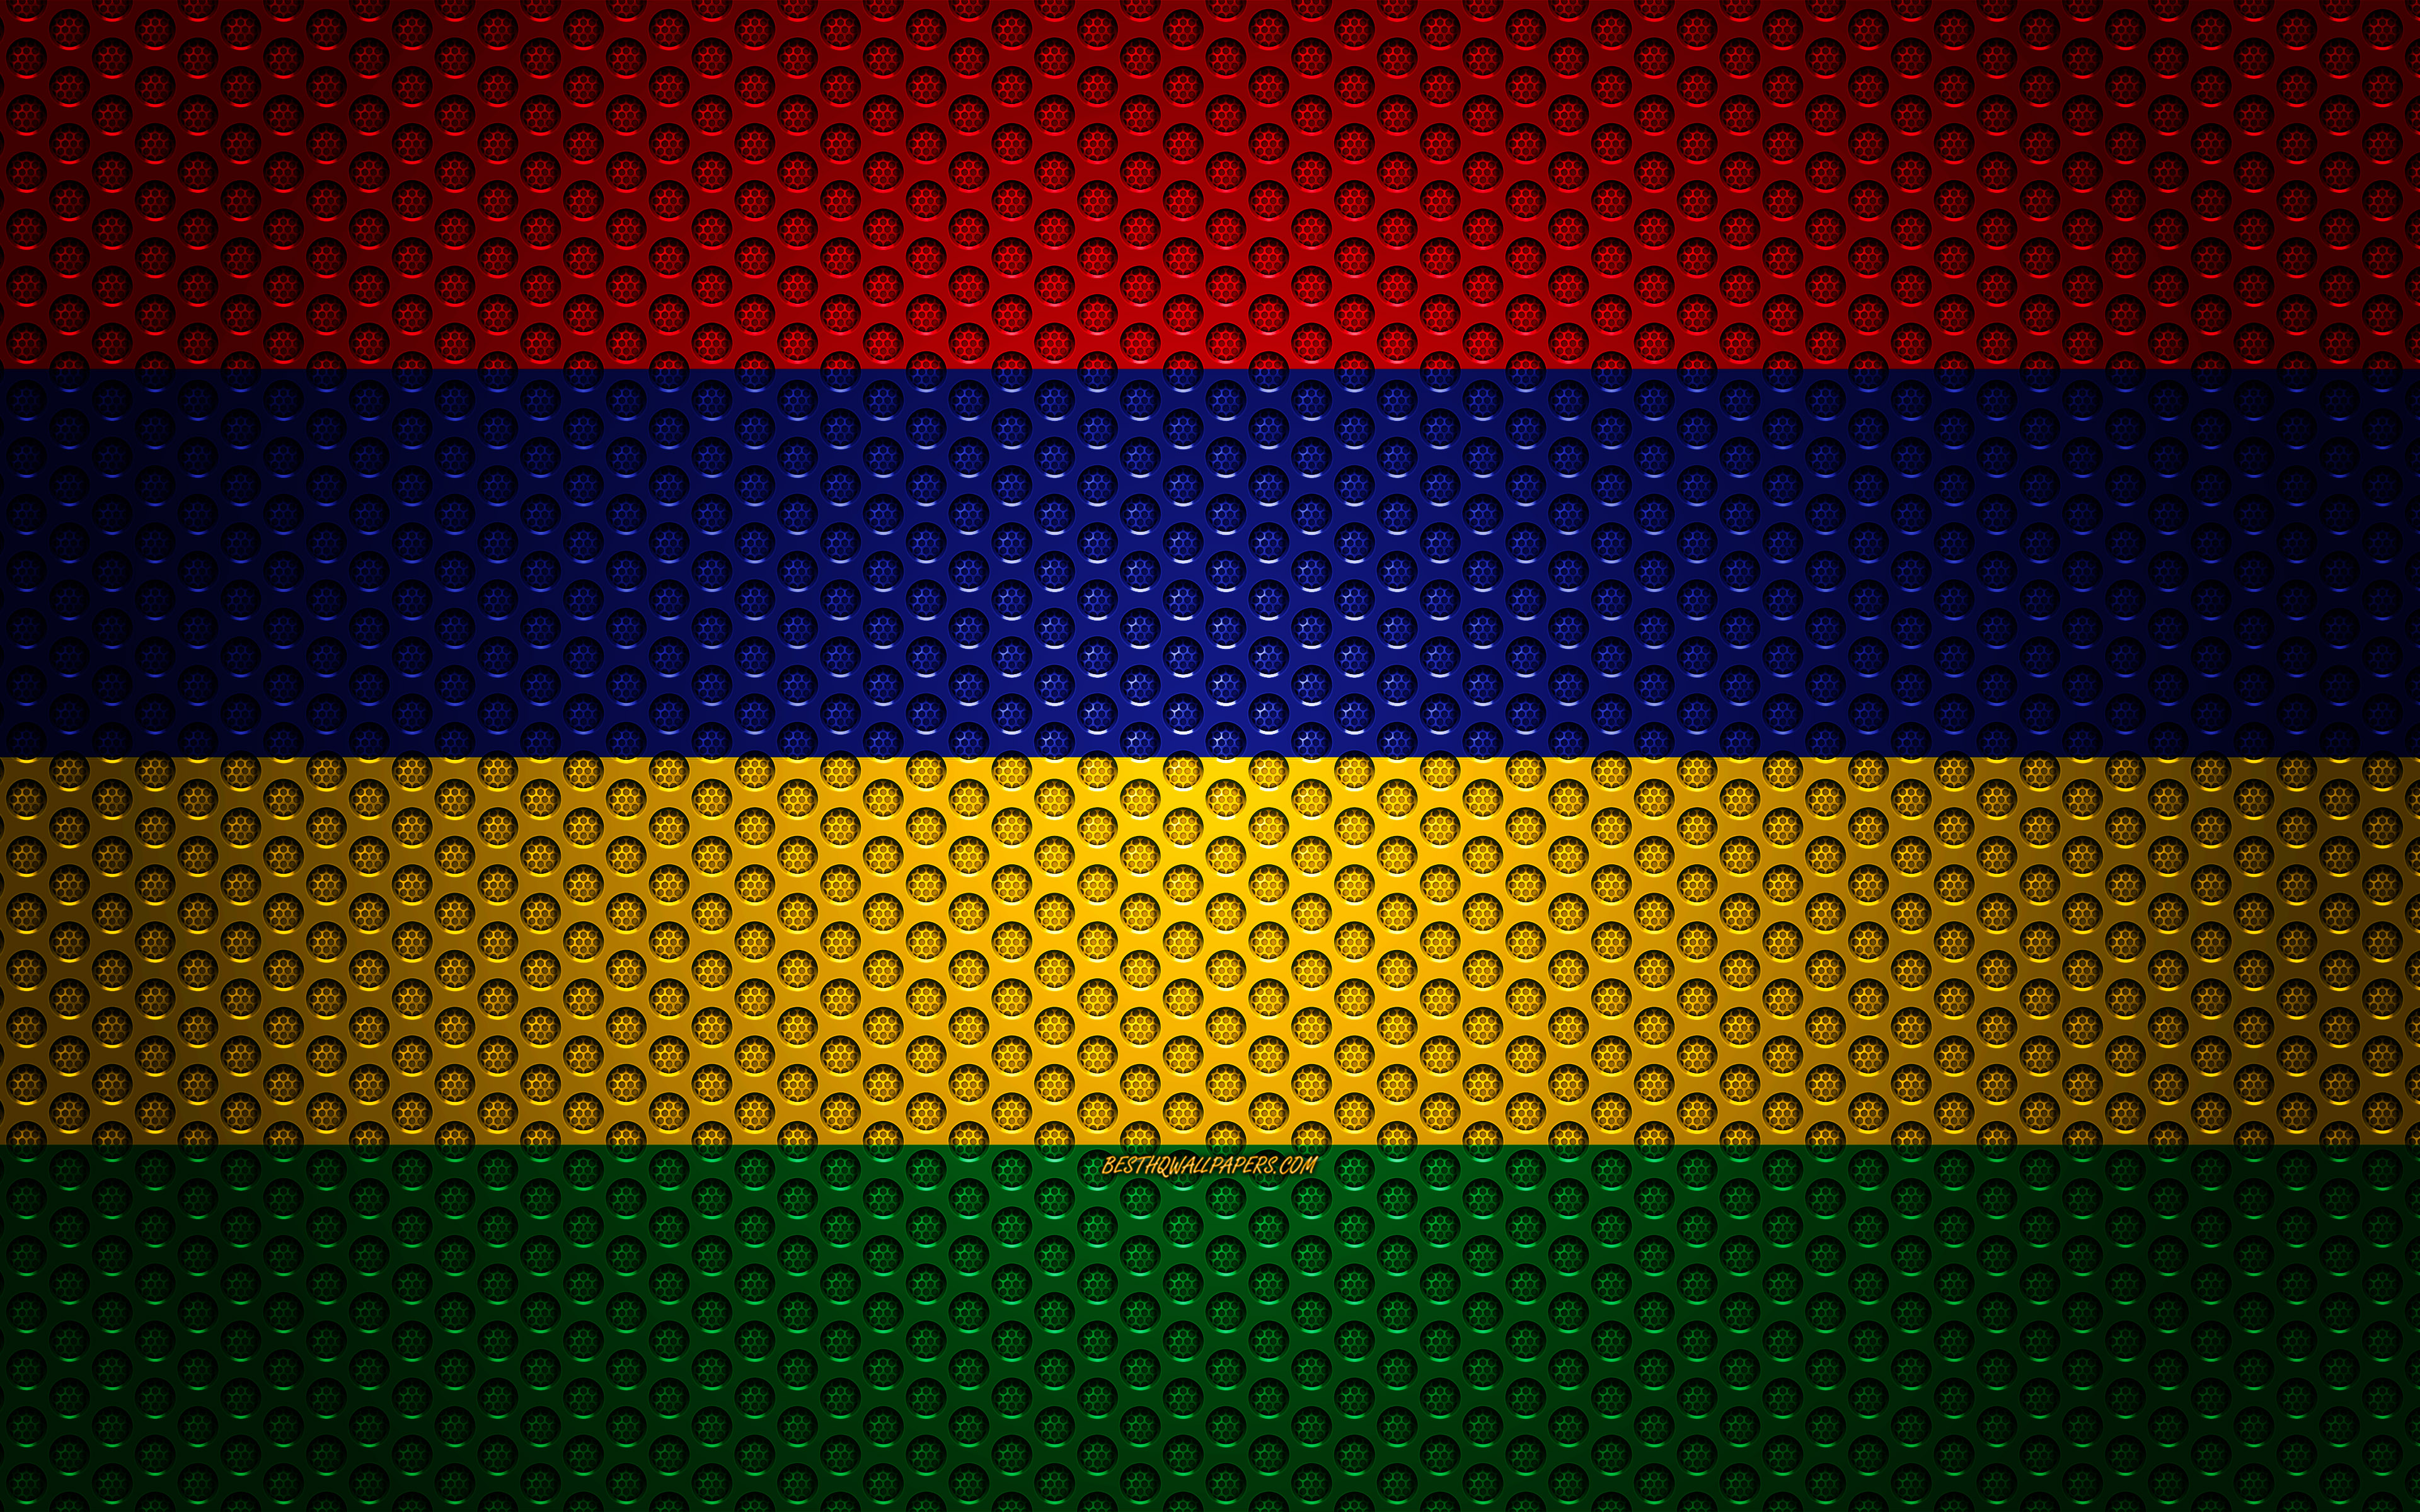 Mauritius Flag Wallpapers